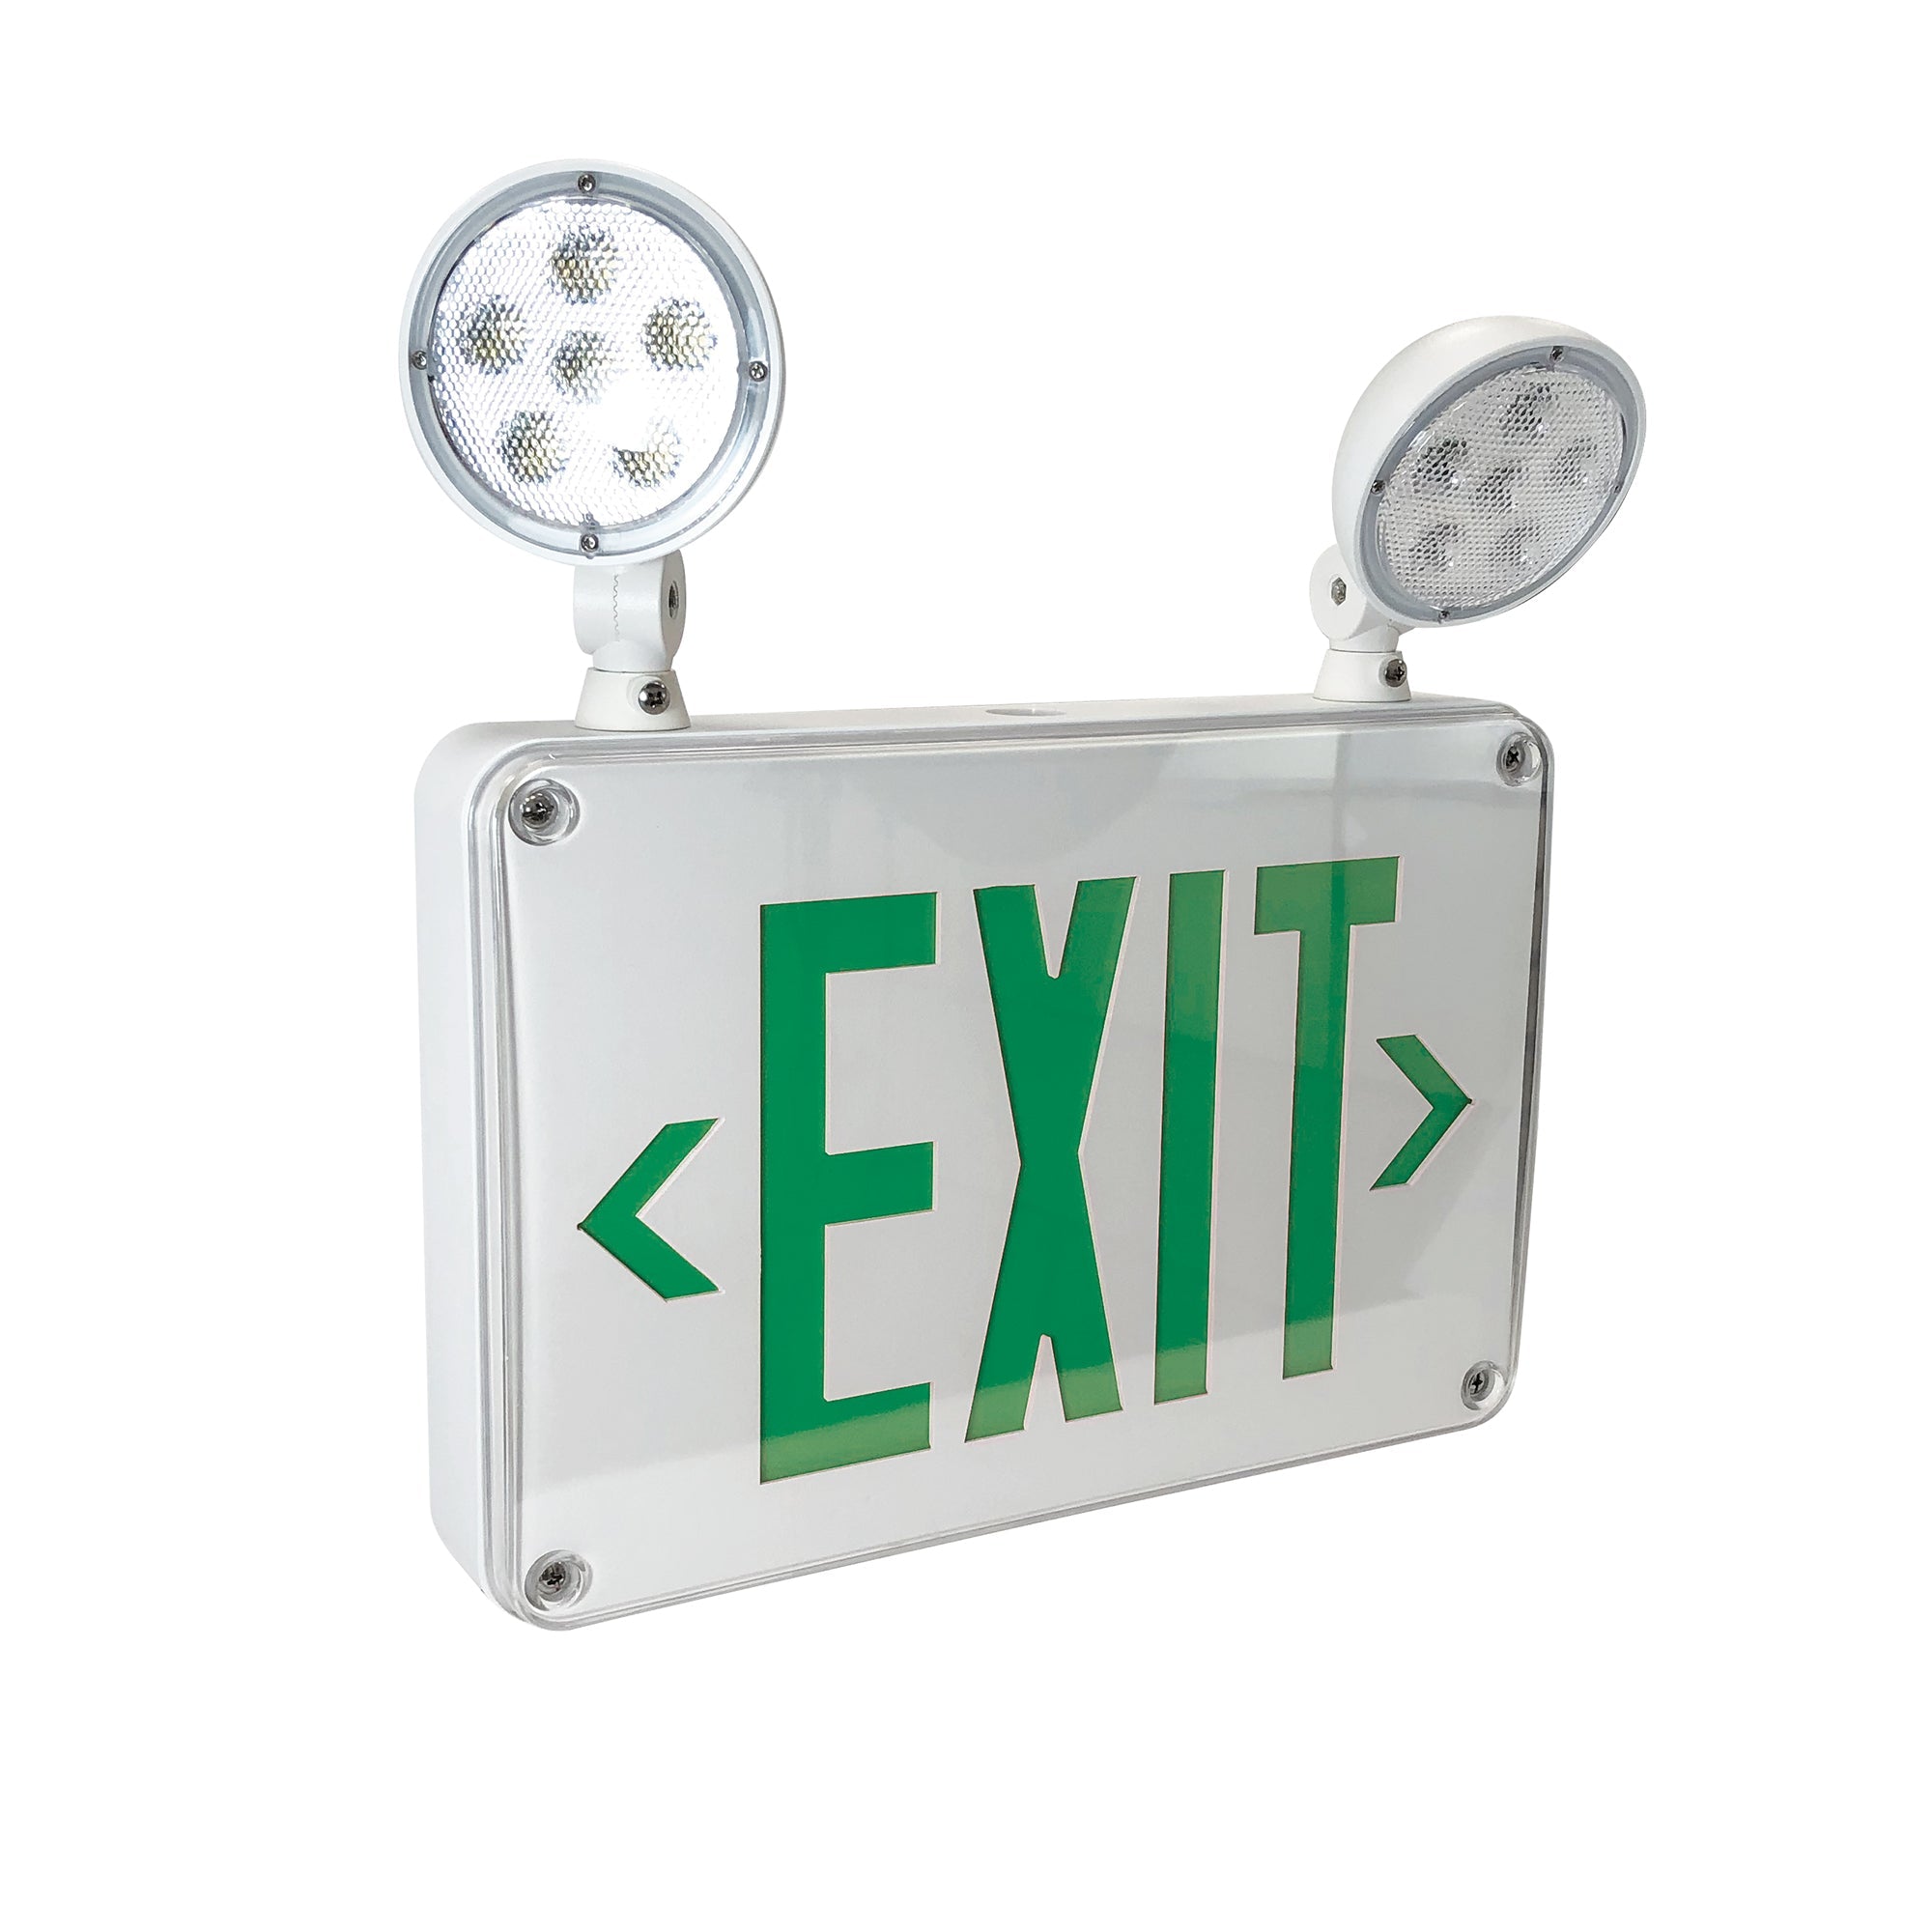 Nora Lighting NEX-720-LED/G - Exit / Emergency - LED Self-Diagnostic Wet Location Exit & Emergency Sign w/ Battery Backup & Remote Capability, White Housing w/ Green Letters